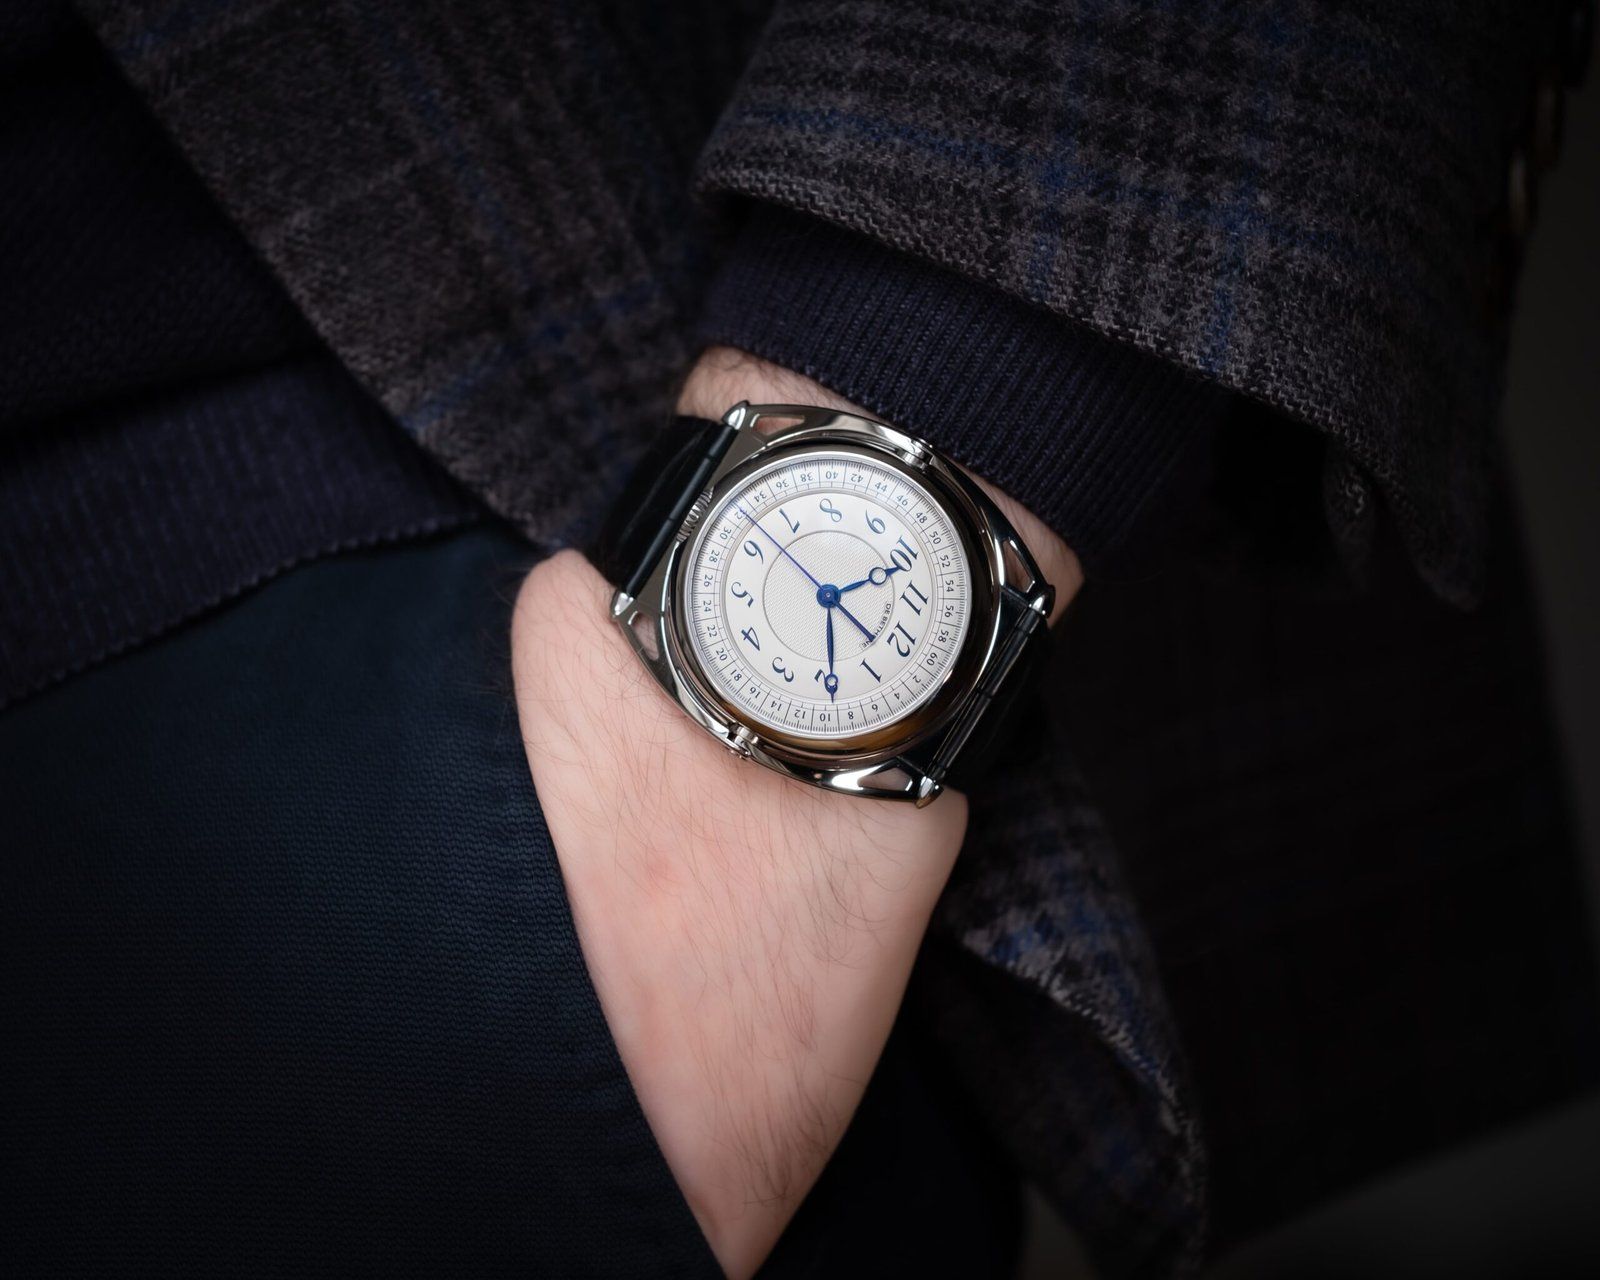 FEATURED: DE BETHUNE - DB Kind of Two Tourbillon